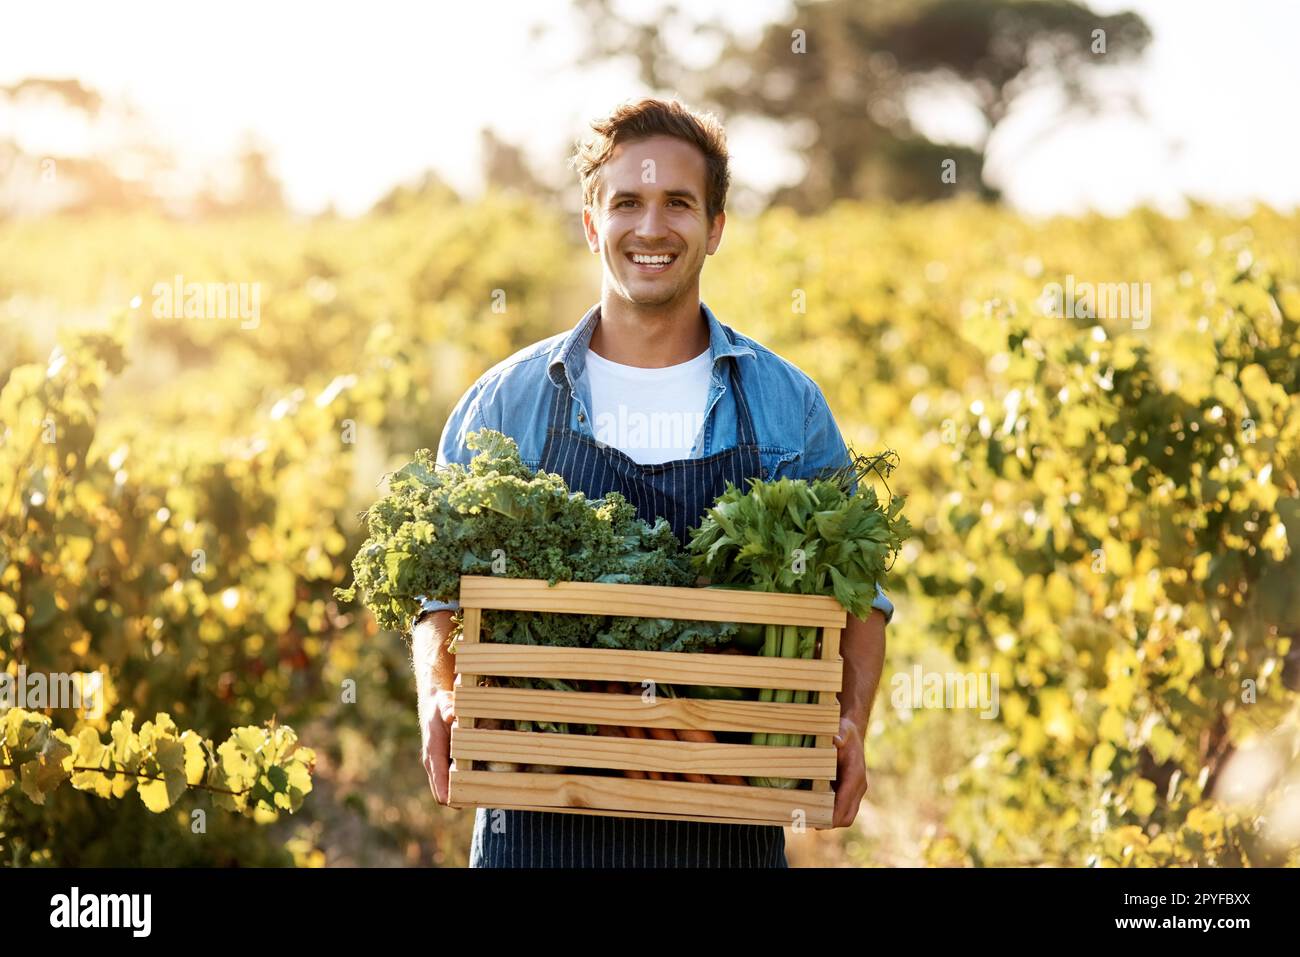 Farming requires time, hard work, dedication, perseverance and commitment. a young man holding a crate full of freshly picked produce on a farm. Stock Photo